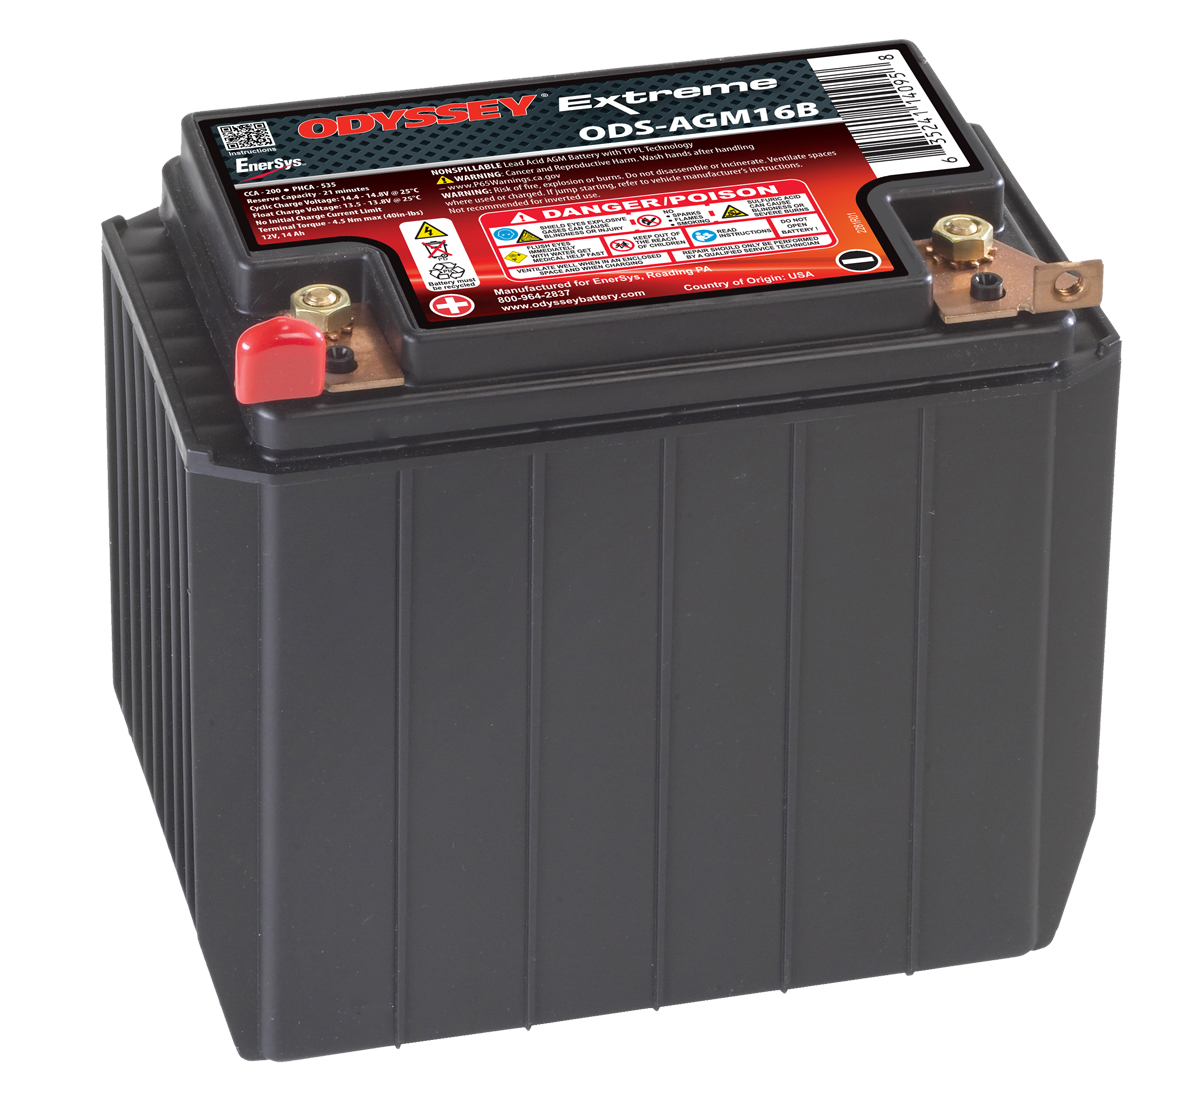 Odyssey ODS-AGM16B PC535 Extreme Racing 18 Battery